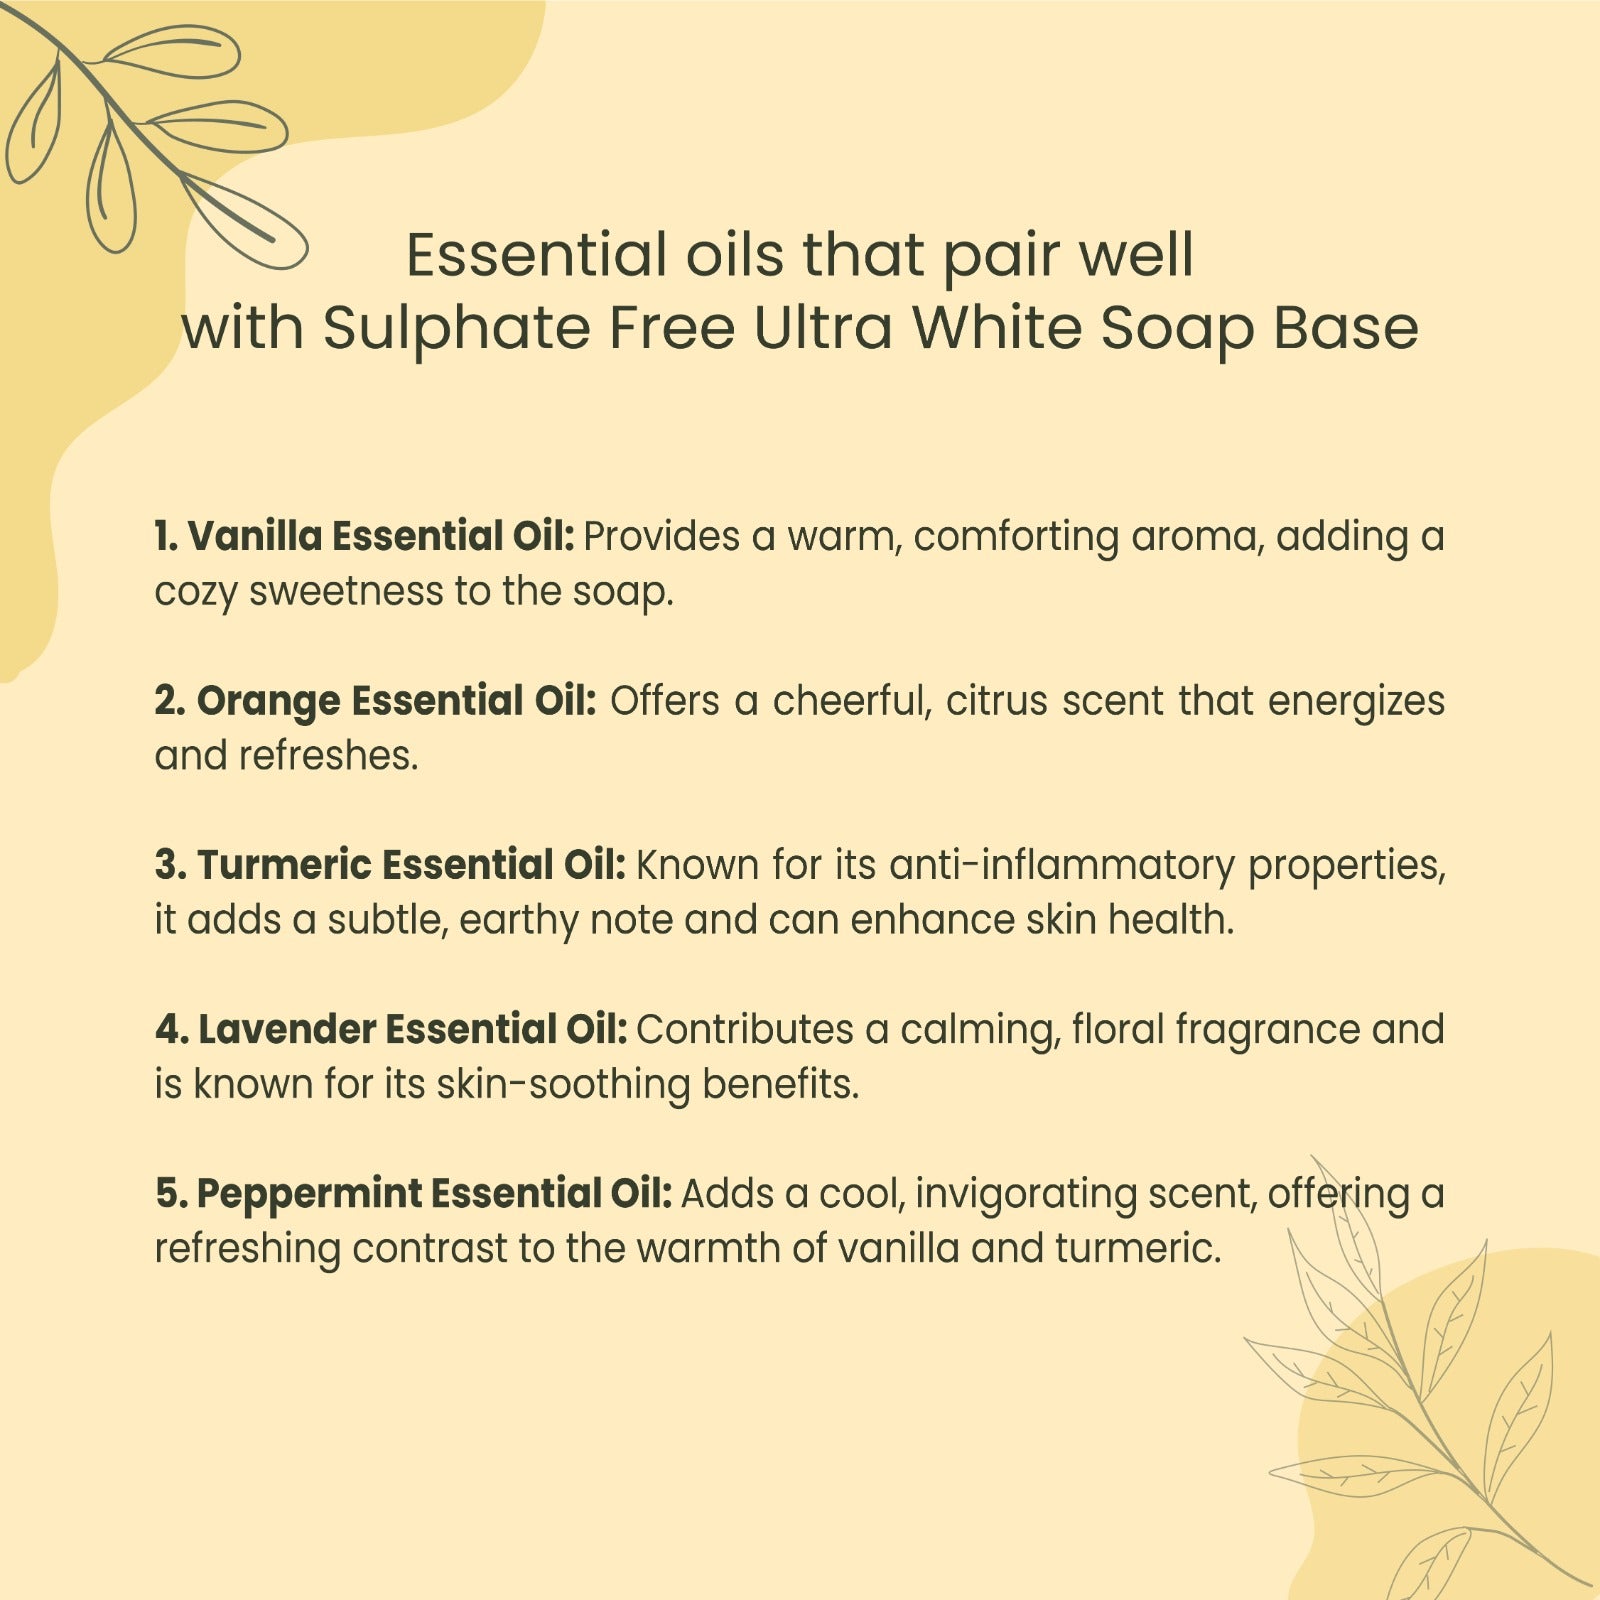 Sulfate Free Ultra White Melt and Pour Soap Base